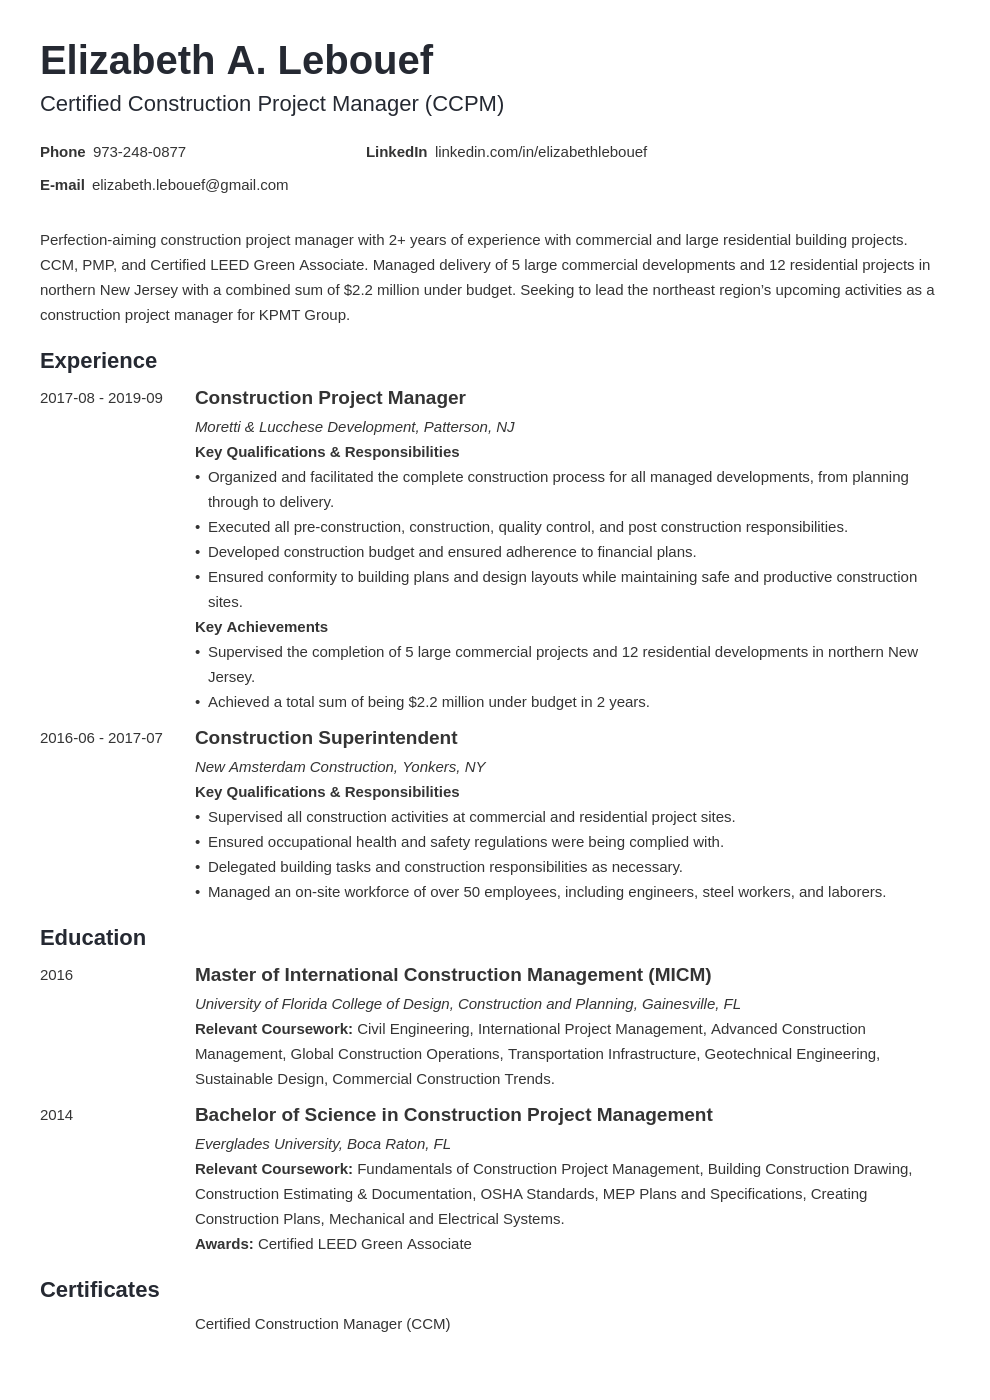 Construction Project Manager Resume Examples & Guide Regarding Construction Project Manager Job Description Template For Construction Project Manager Job Description Template